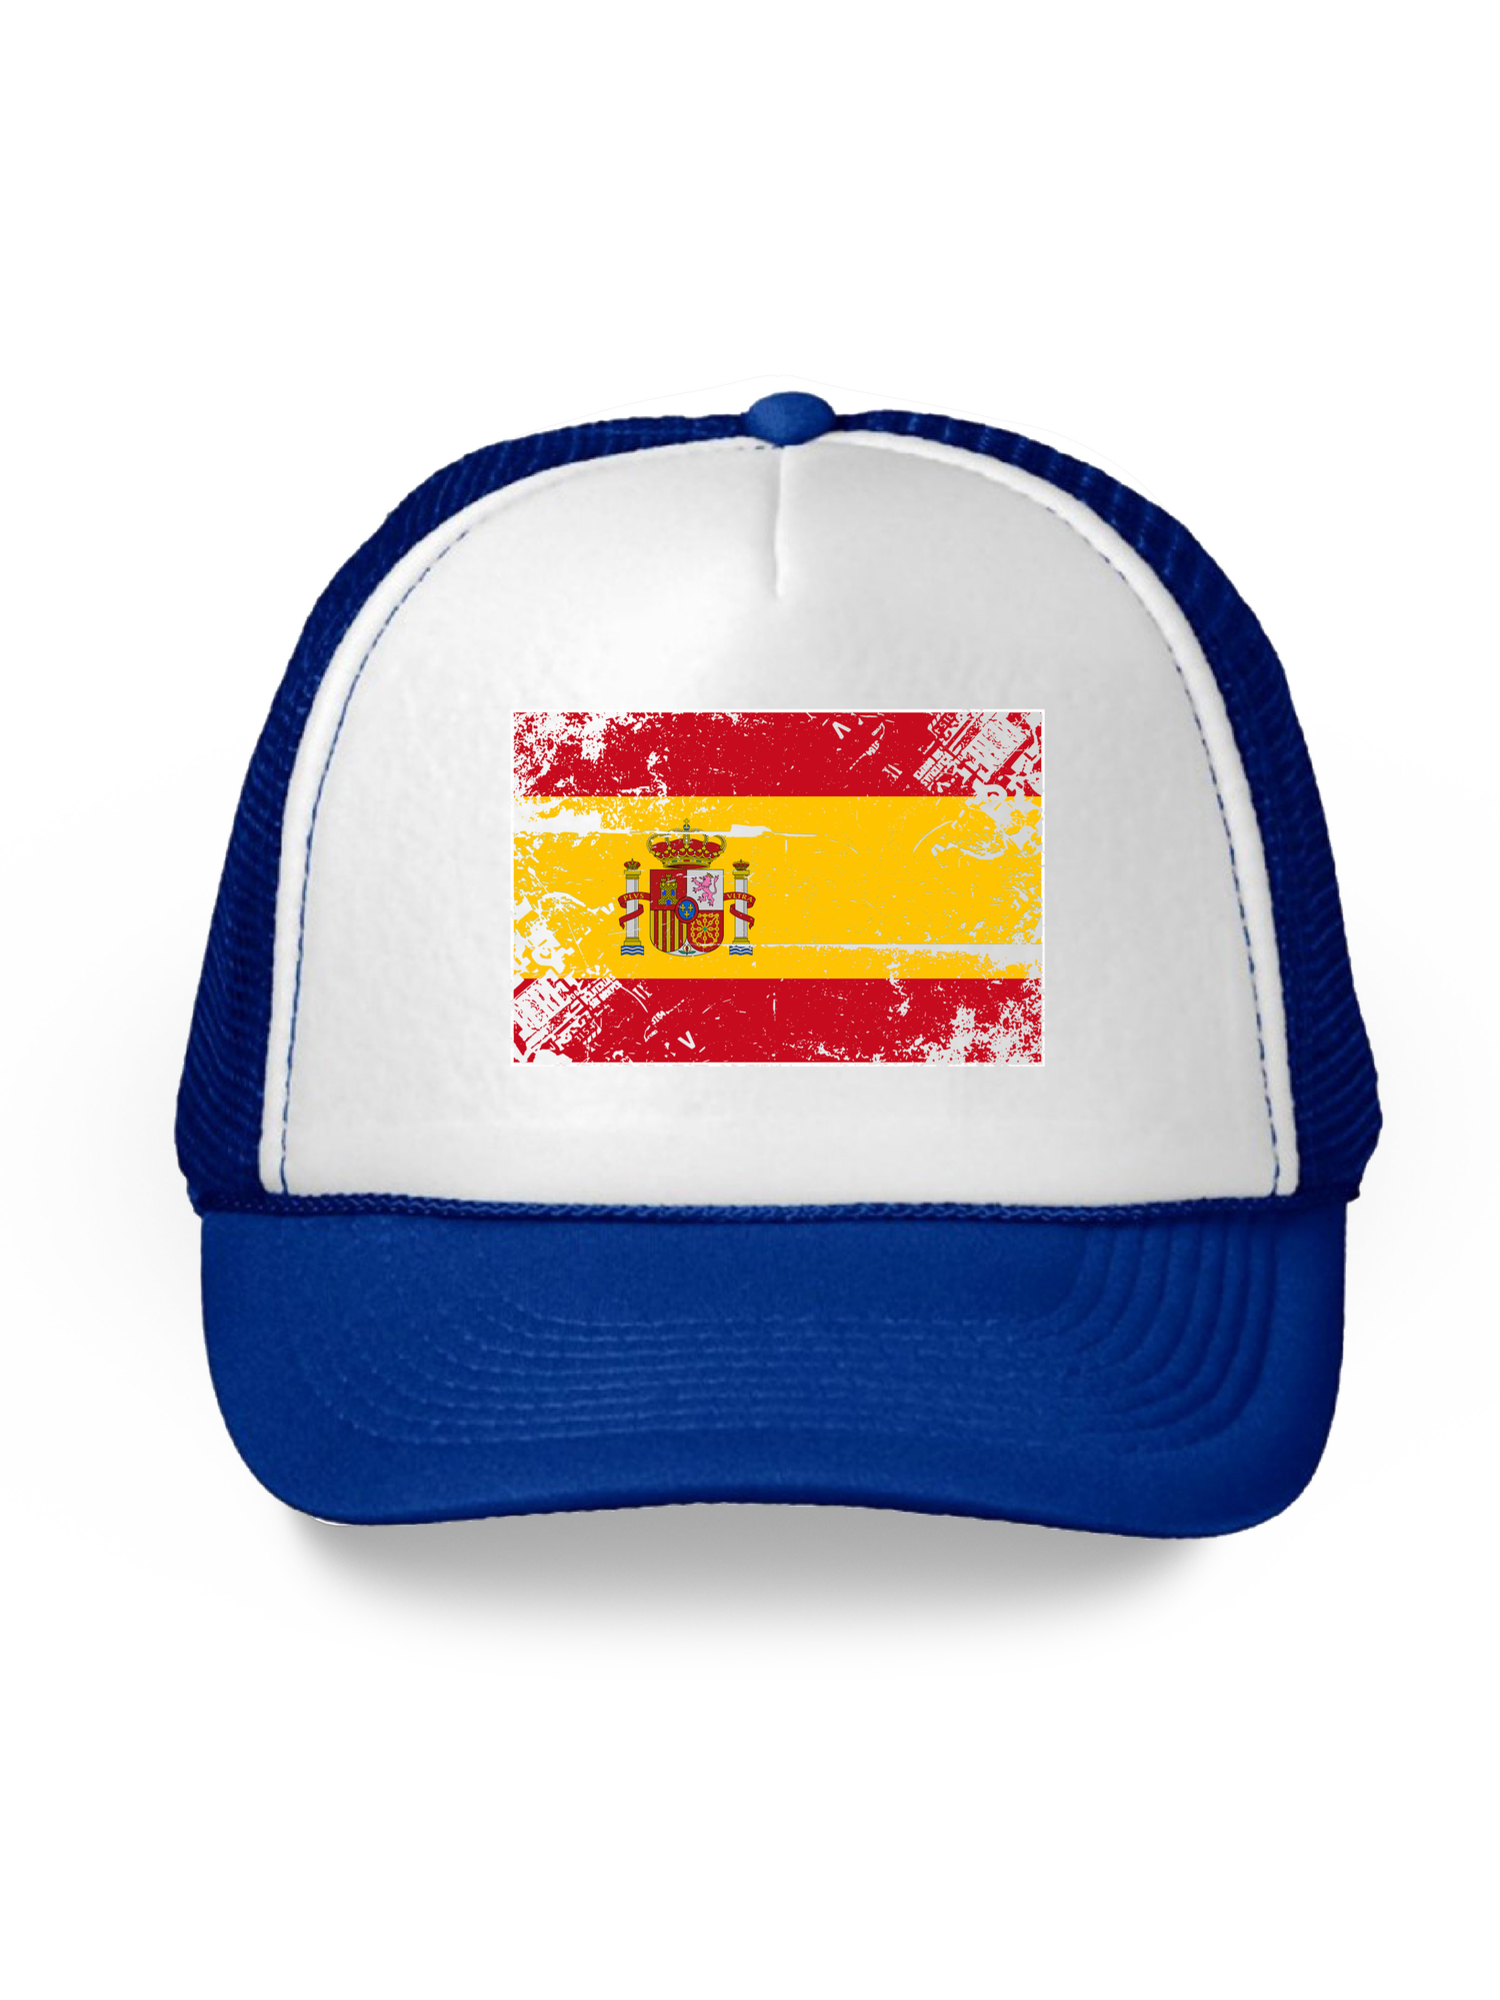 Awkward Styles Spain Flag Hat Spanish Trucker Hat Spain Baseball Cap Amazing Gifts from Spain Spanish Soccer 2018 Hat Spain 2018 Hat for Men and Women Spanish Flag Snapback Hats Spain Gifts - image 1 of 6